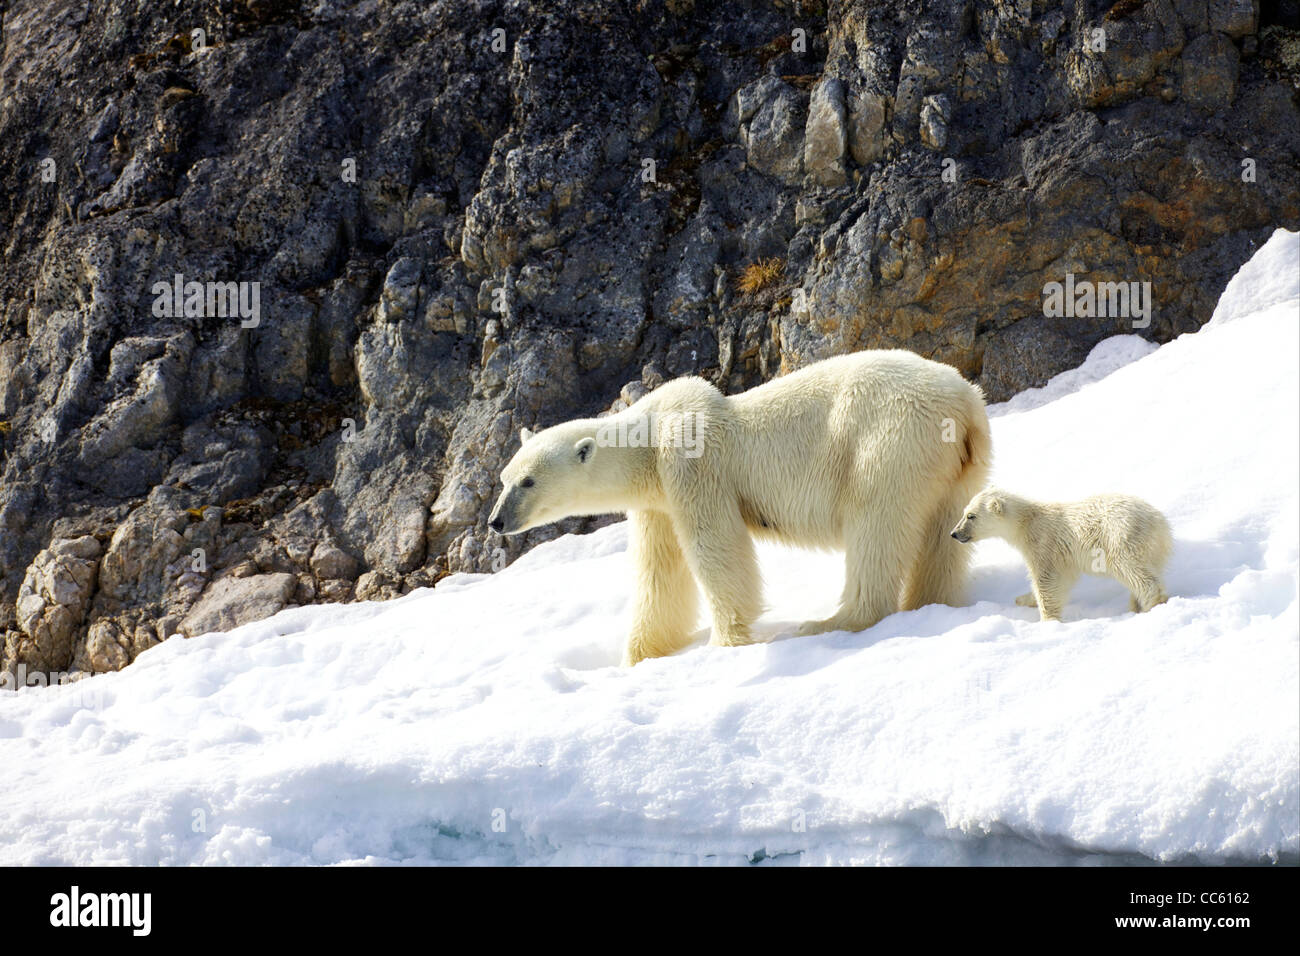 Polar Bear Mother And 6 Month Old Cub In Snowy Landscape In Arctic